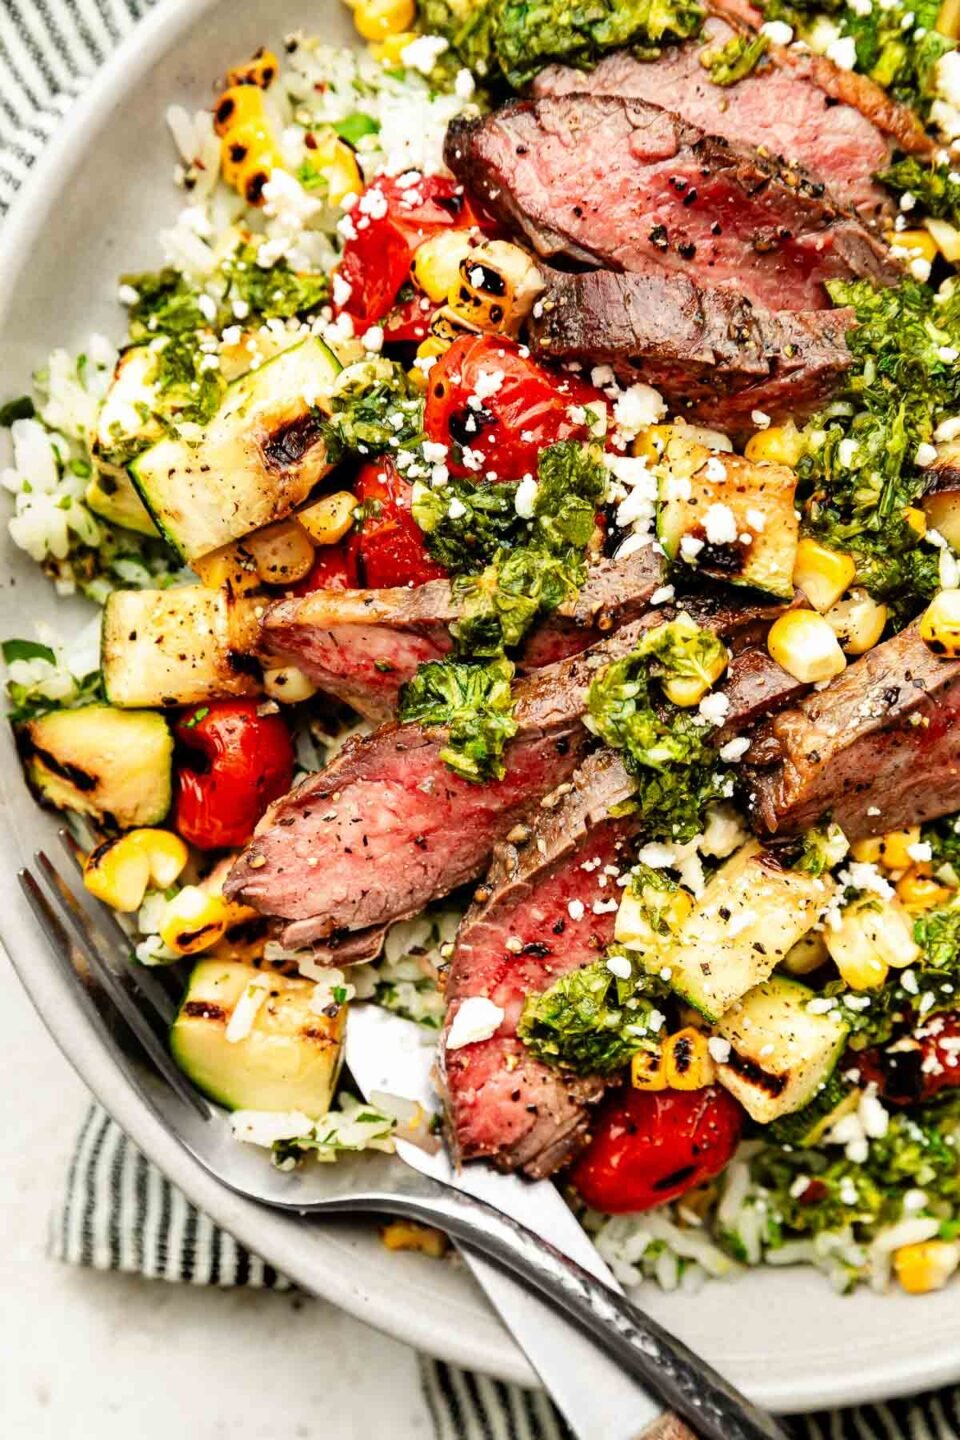 An overhead shot of a chimichurri steak bowl atop a striped cloth on a white textured surface.